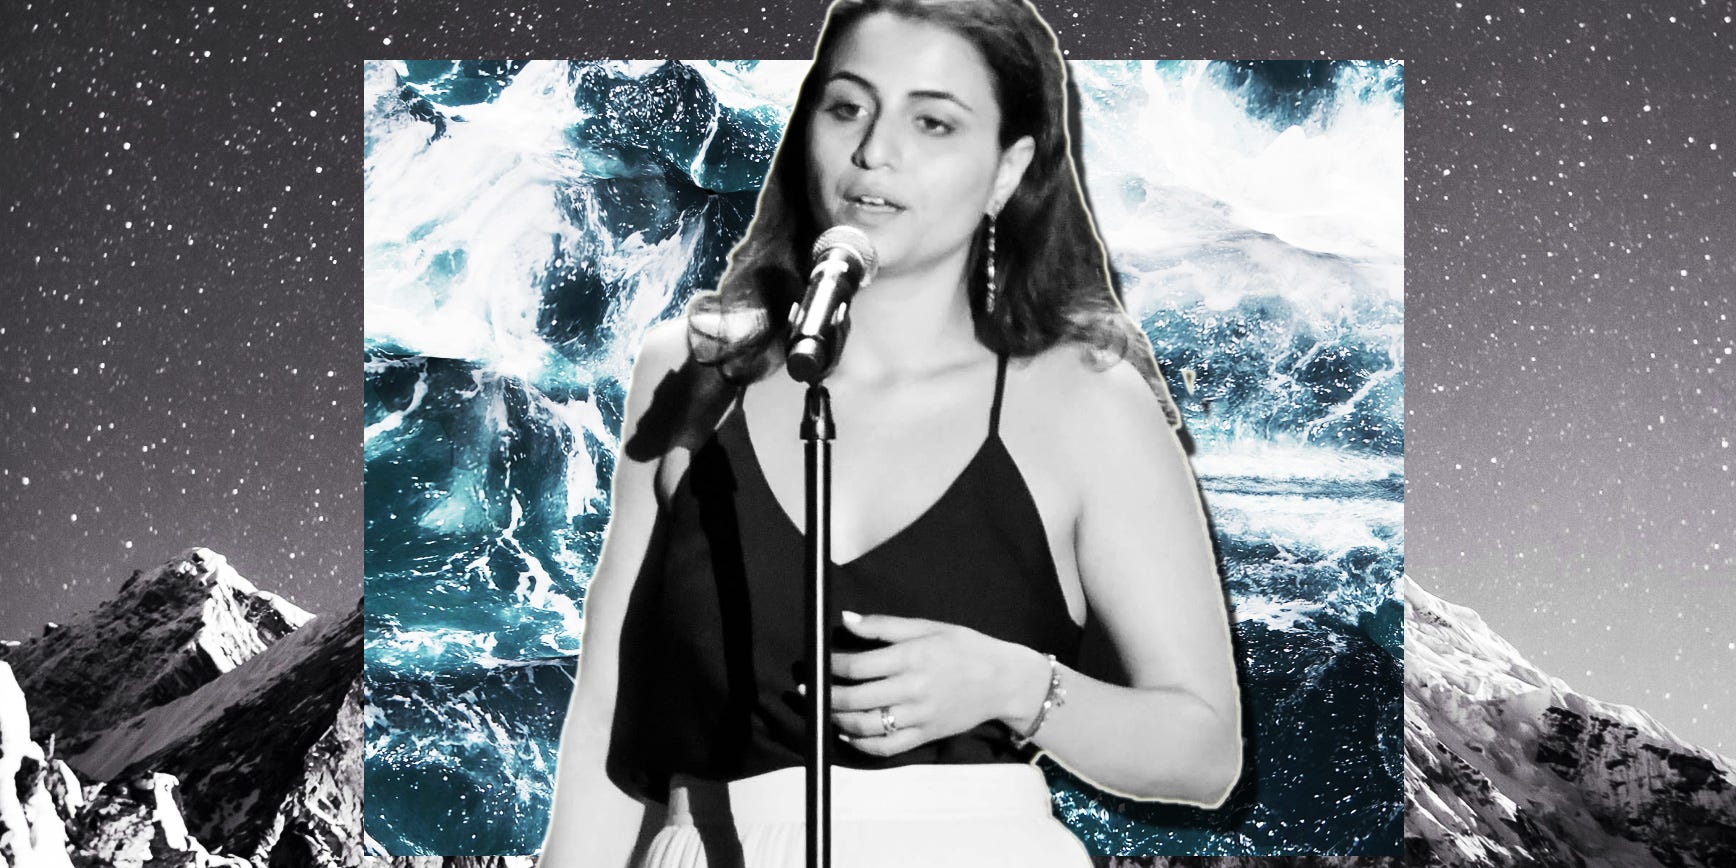 Beauty, Water, Black-and-white, Music artist, Singer, Singing, Photography, Album cover, Space, Pop music, 